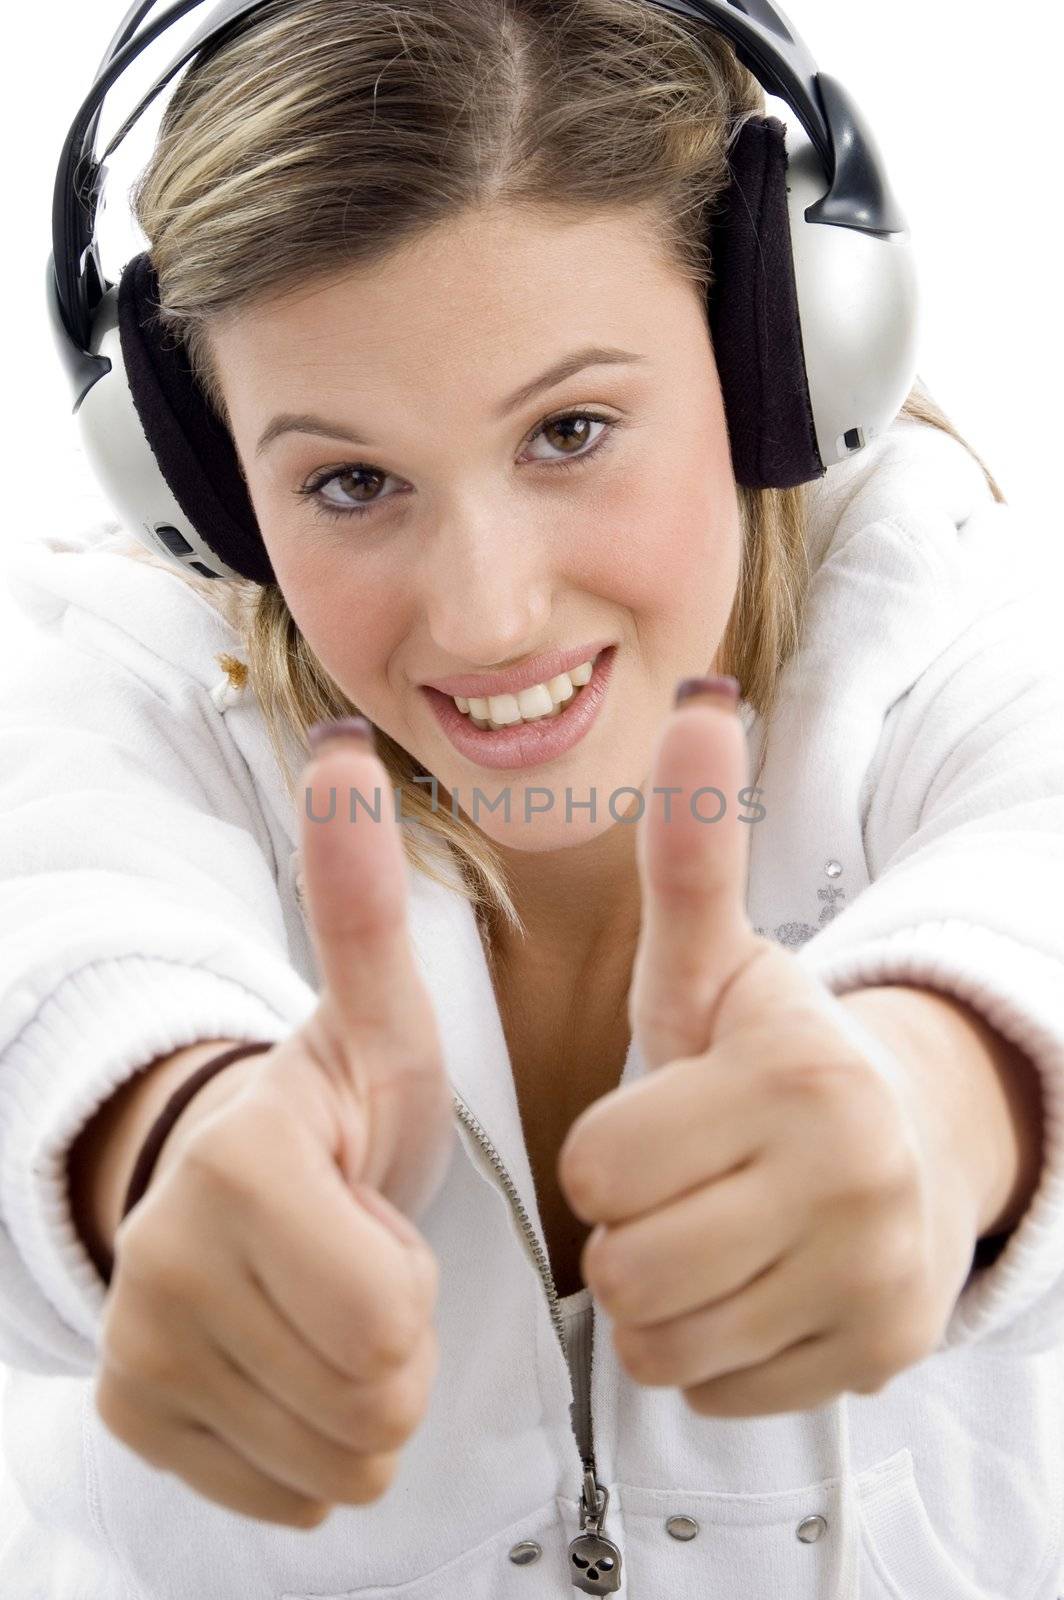 young model listening music with headphones and showing thumbs u by imagerymajestic